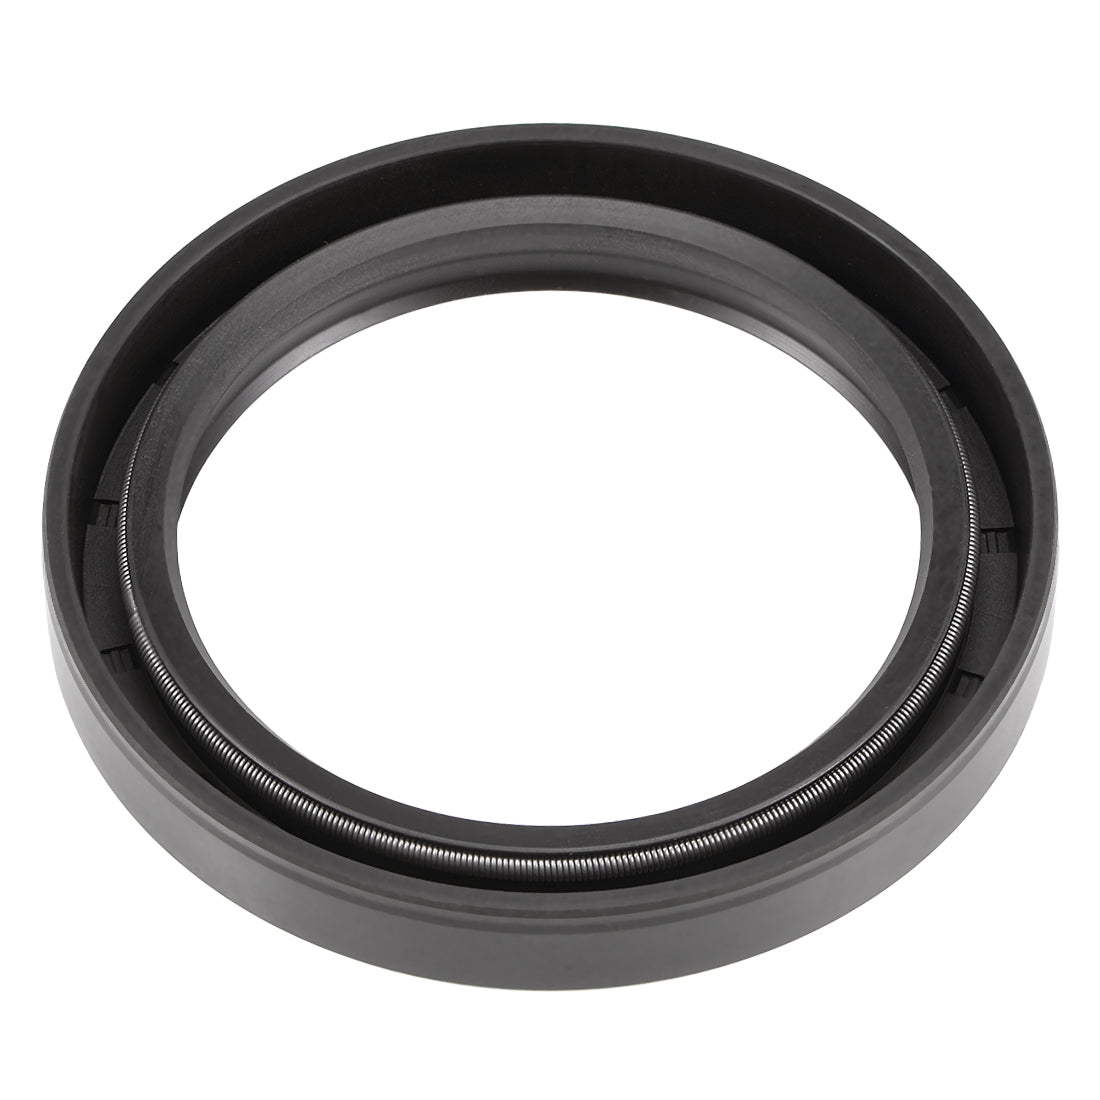 uxcell Uxcell Oil Seal, TC 50mm x 65mm x 9mm, Nitrile Rubber Cover Double Lip